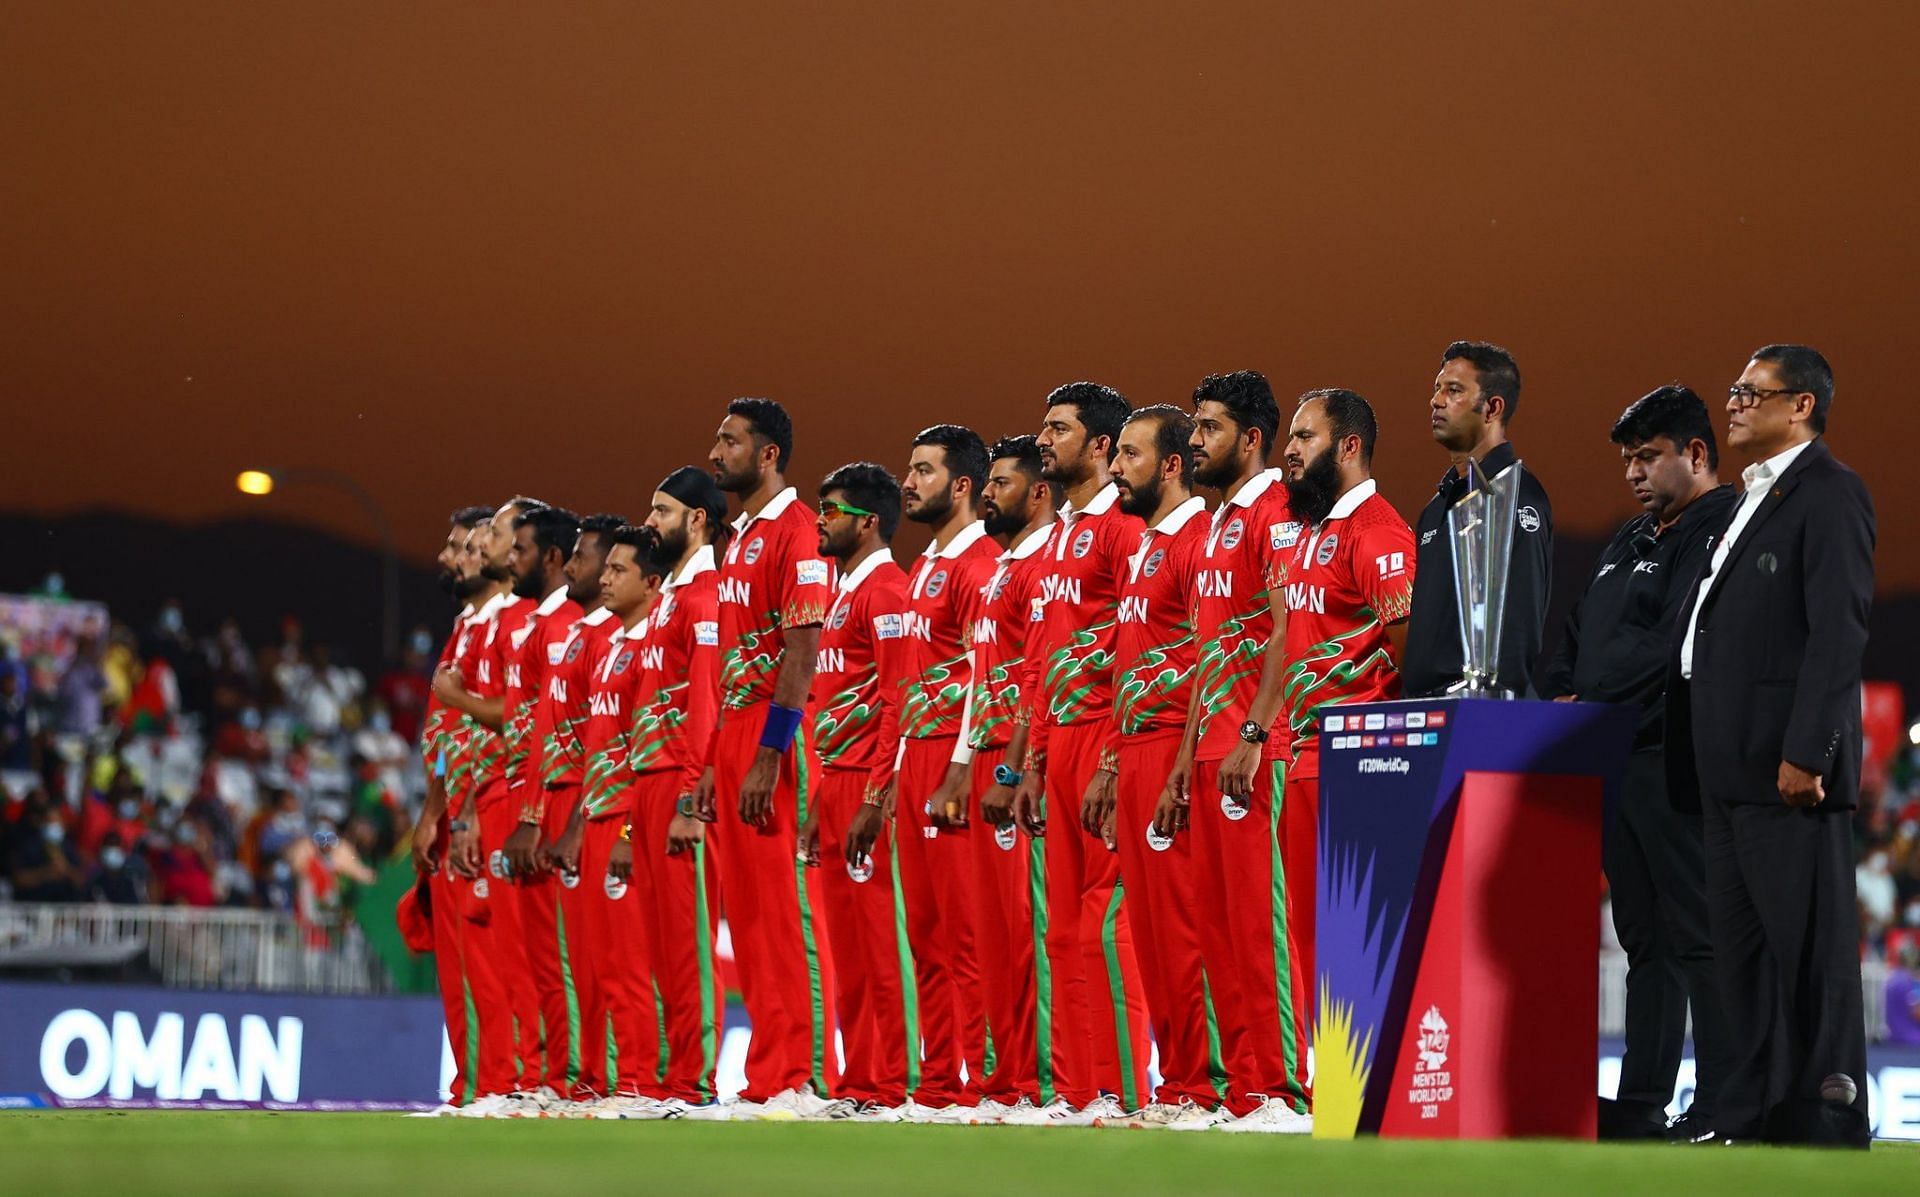 Can Oman make one final push for the Super-12?